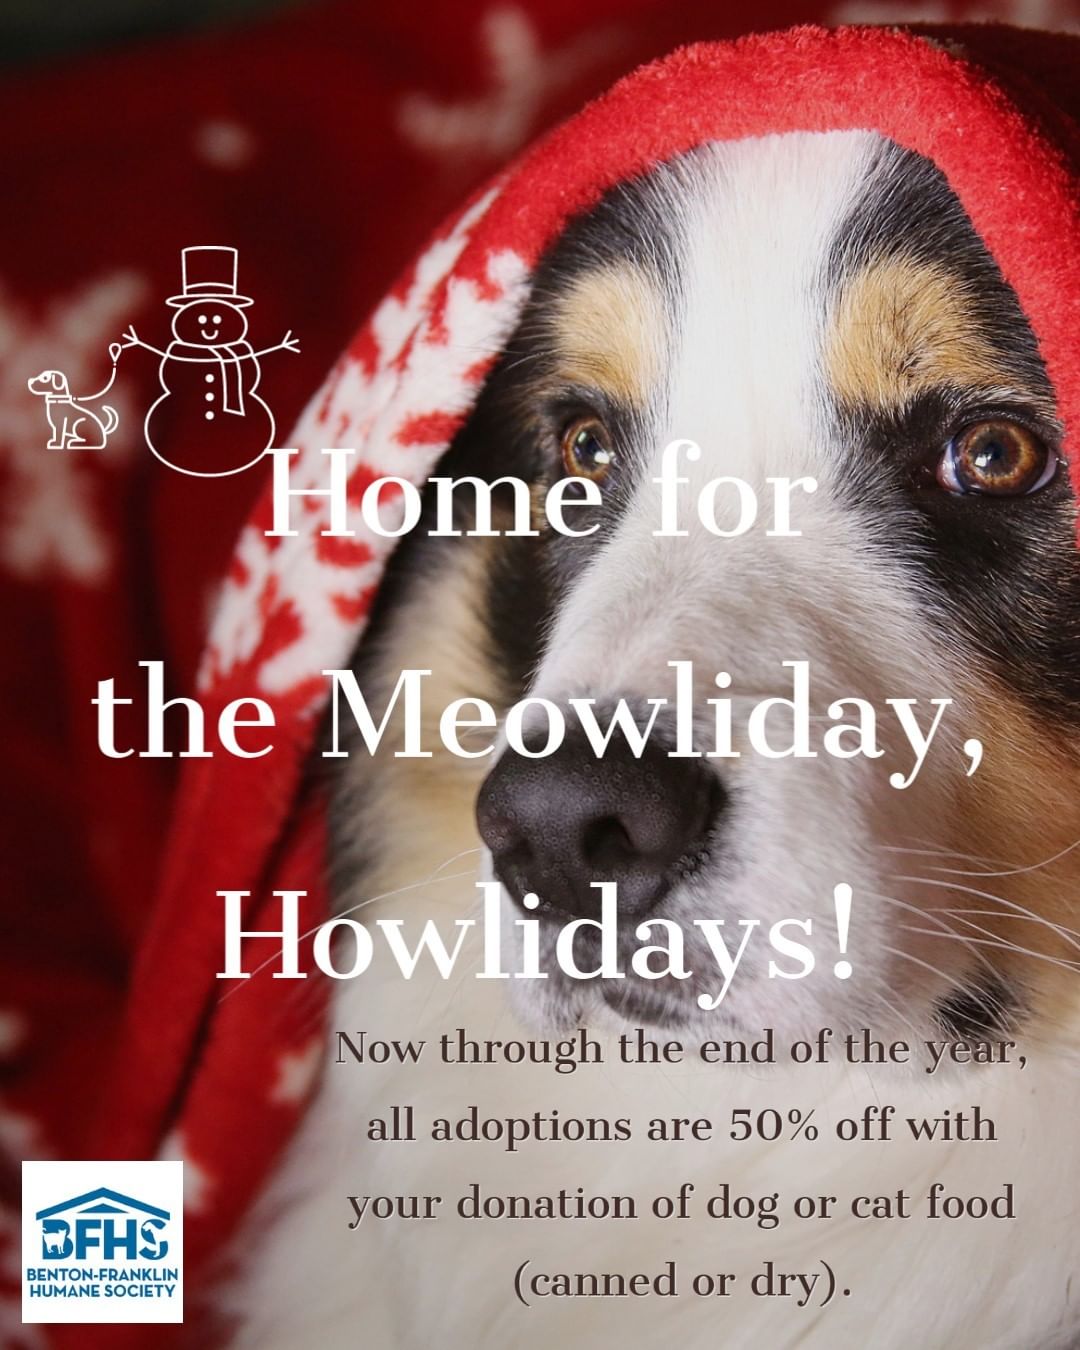 Help us clear the shelter and support our newest arrivals, community pets, and long-term residents.  Now through the end of the year, all adoptions are 50% off with your donation of dog or cat food - whether it's 1 can or 10 bags.  We are so grateful for your support!